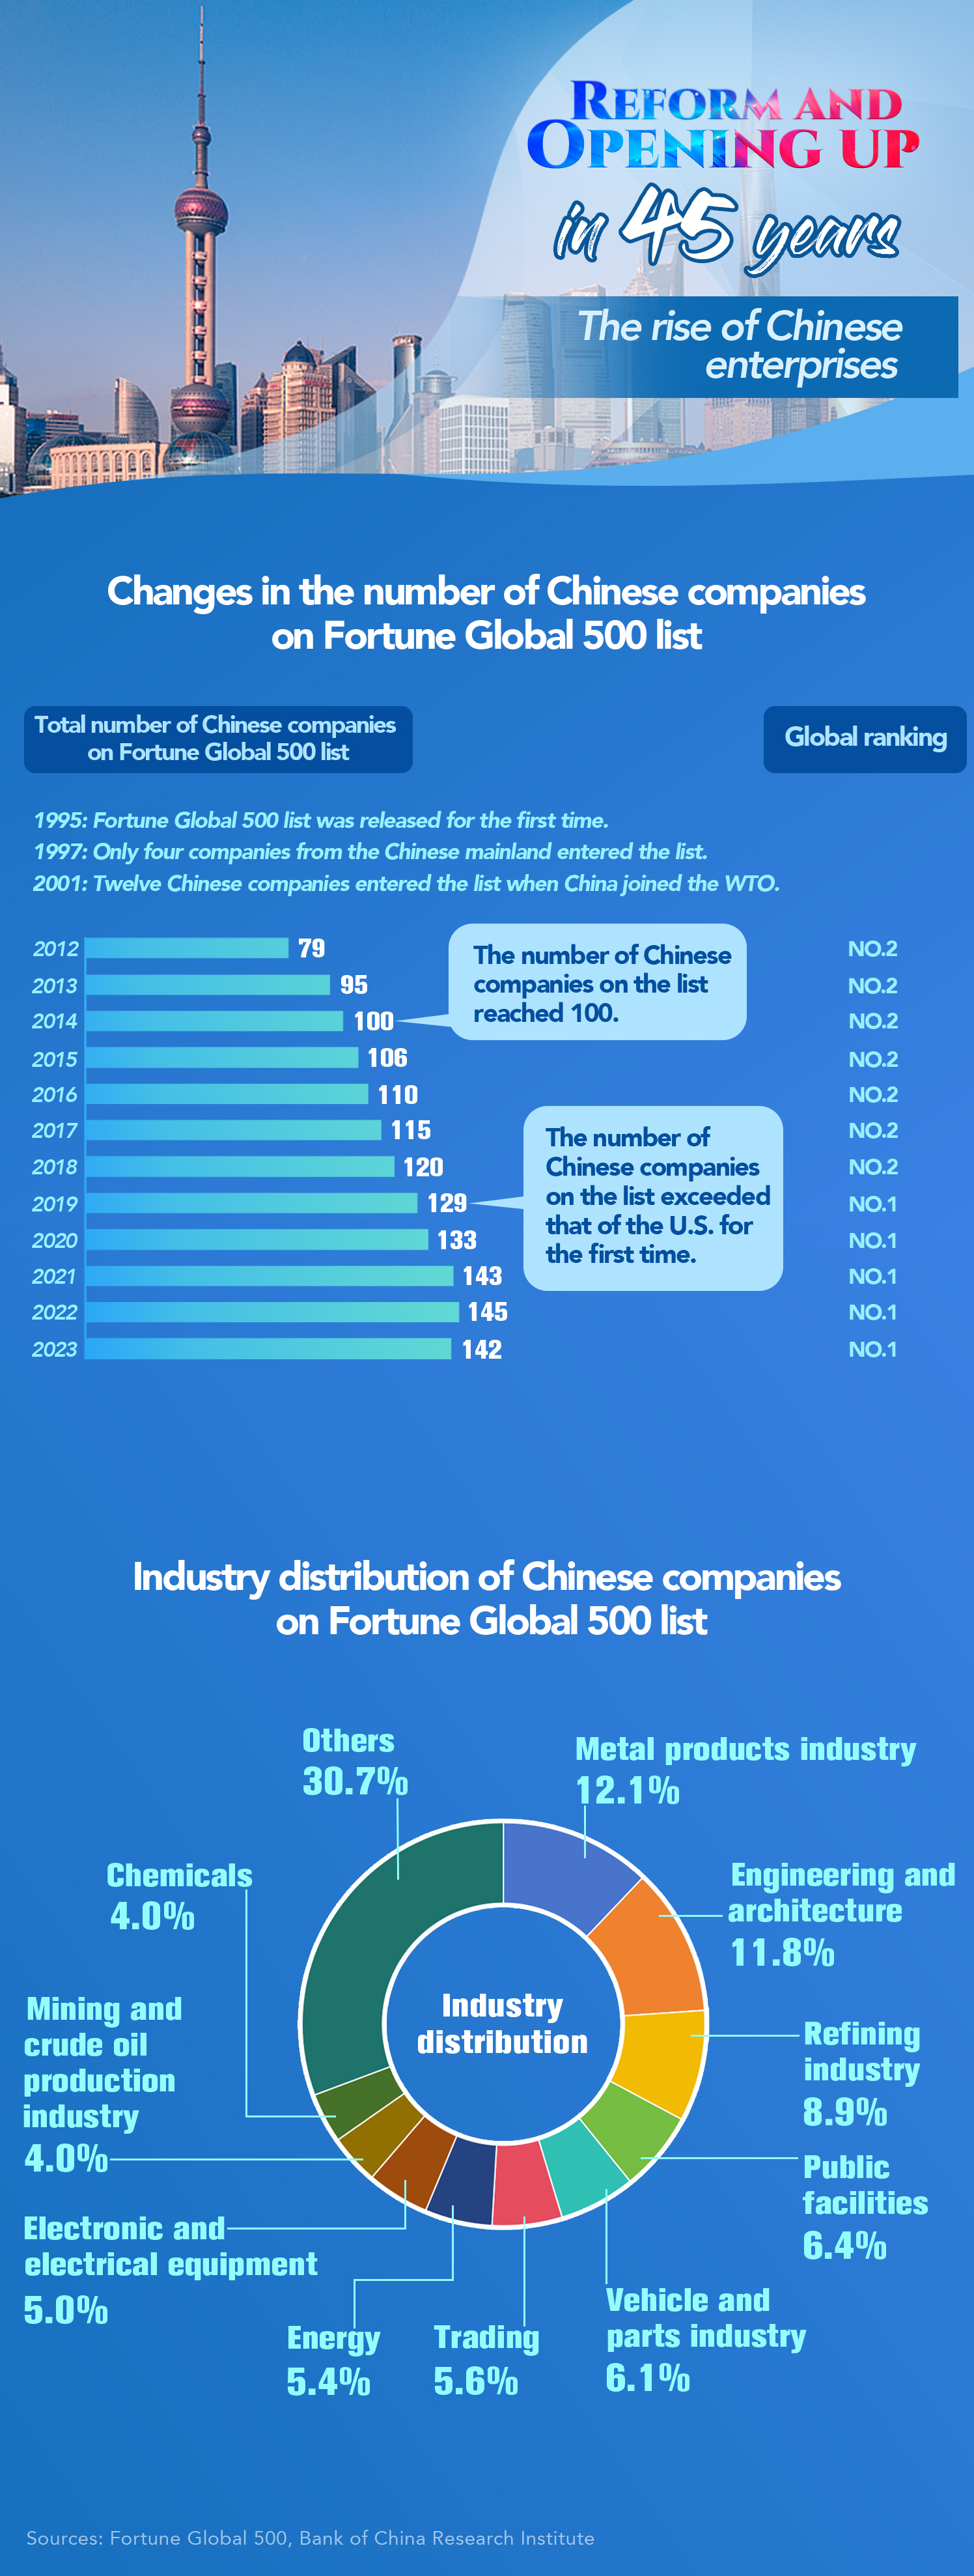 Graphics: The rise of Chinese enterprises in 45 years of reform and opening up